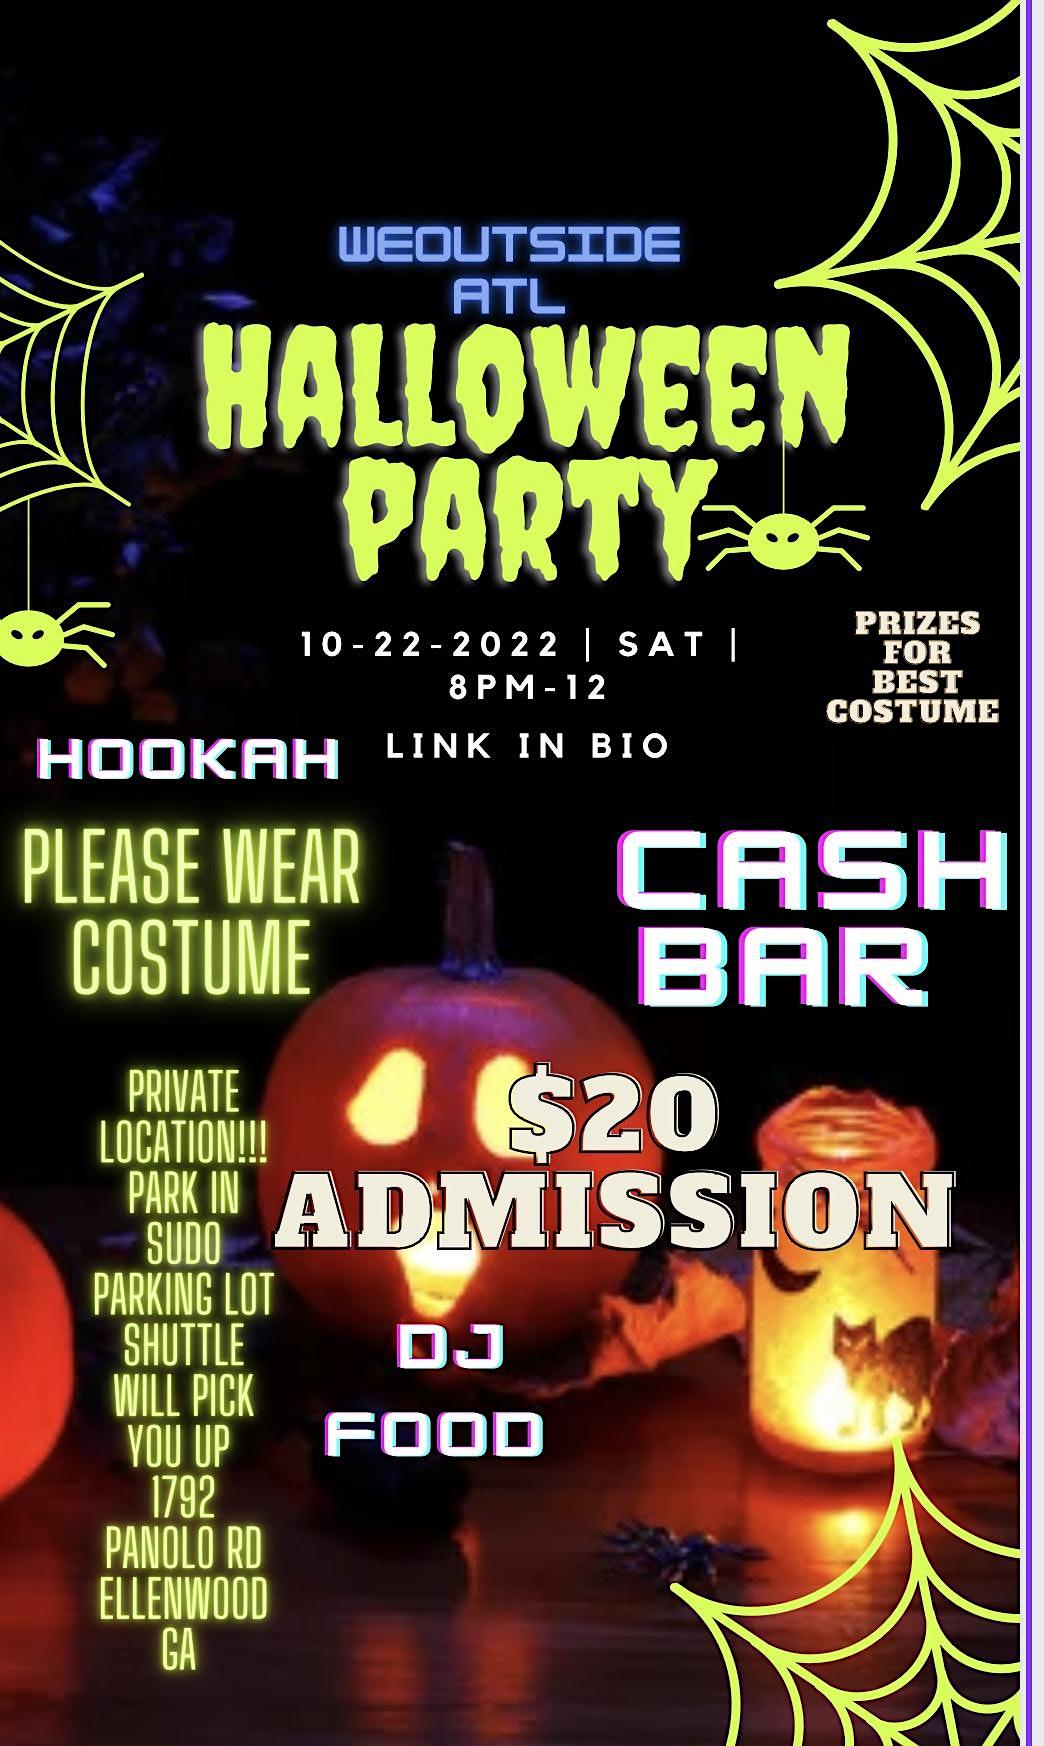 Halloween Party
Sat Oct 22, 8:00 PM - Sun Oct 23, 12:00 AM
in 3 days